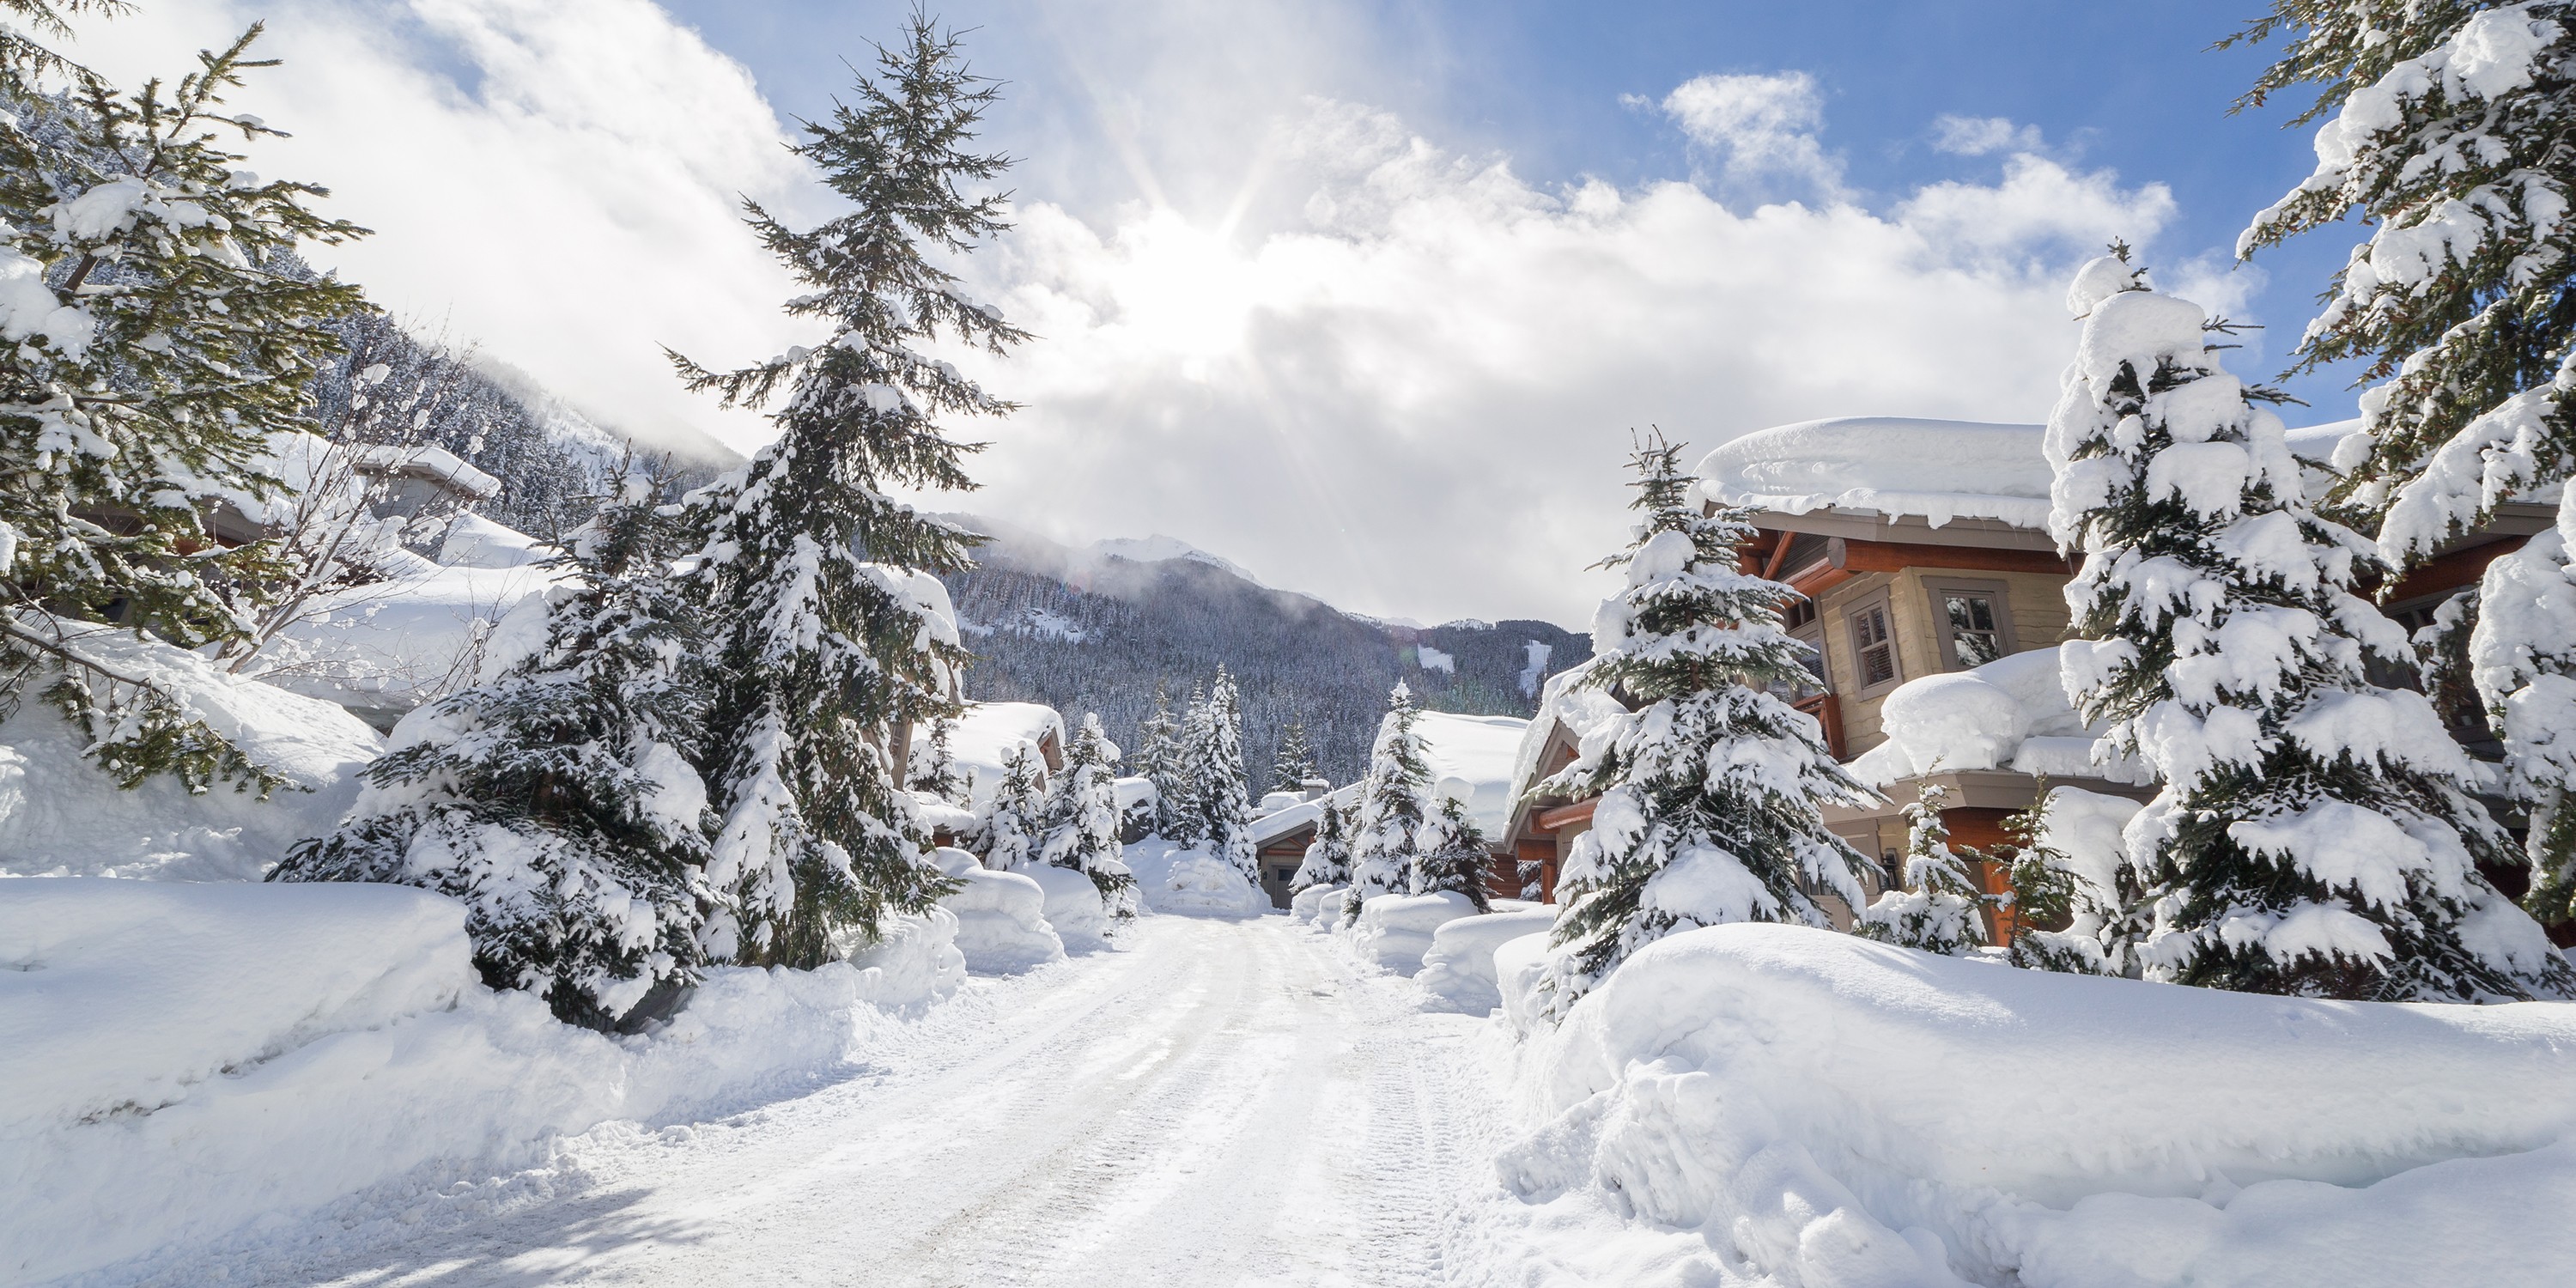 Best Mountain Towns for Winter | Via